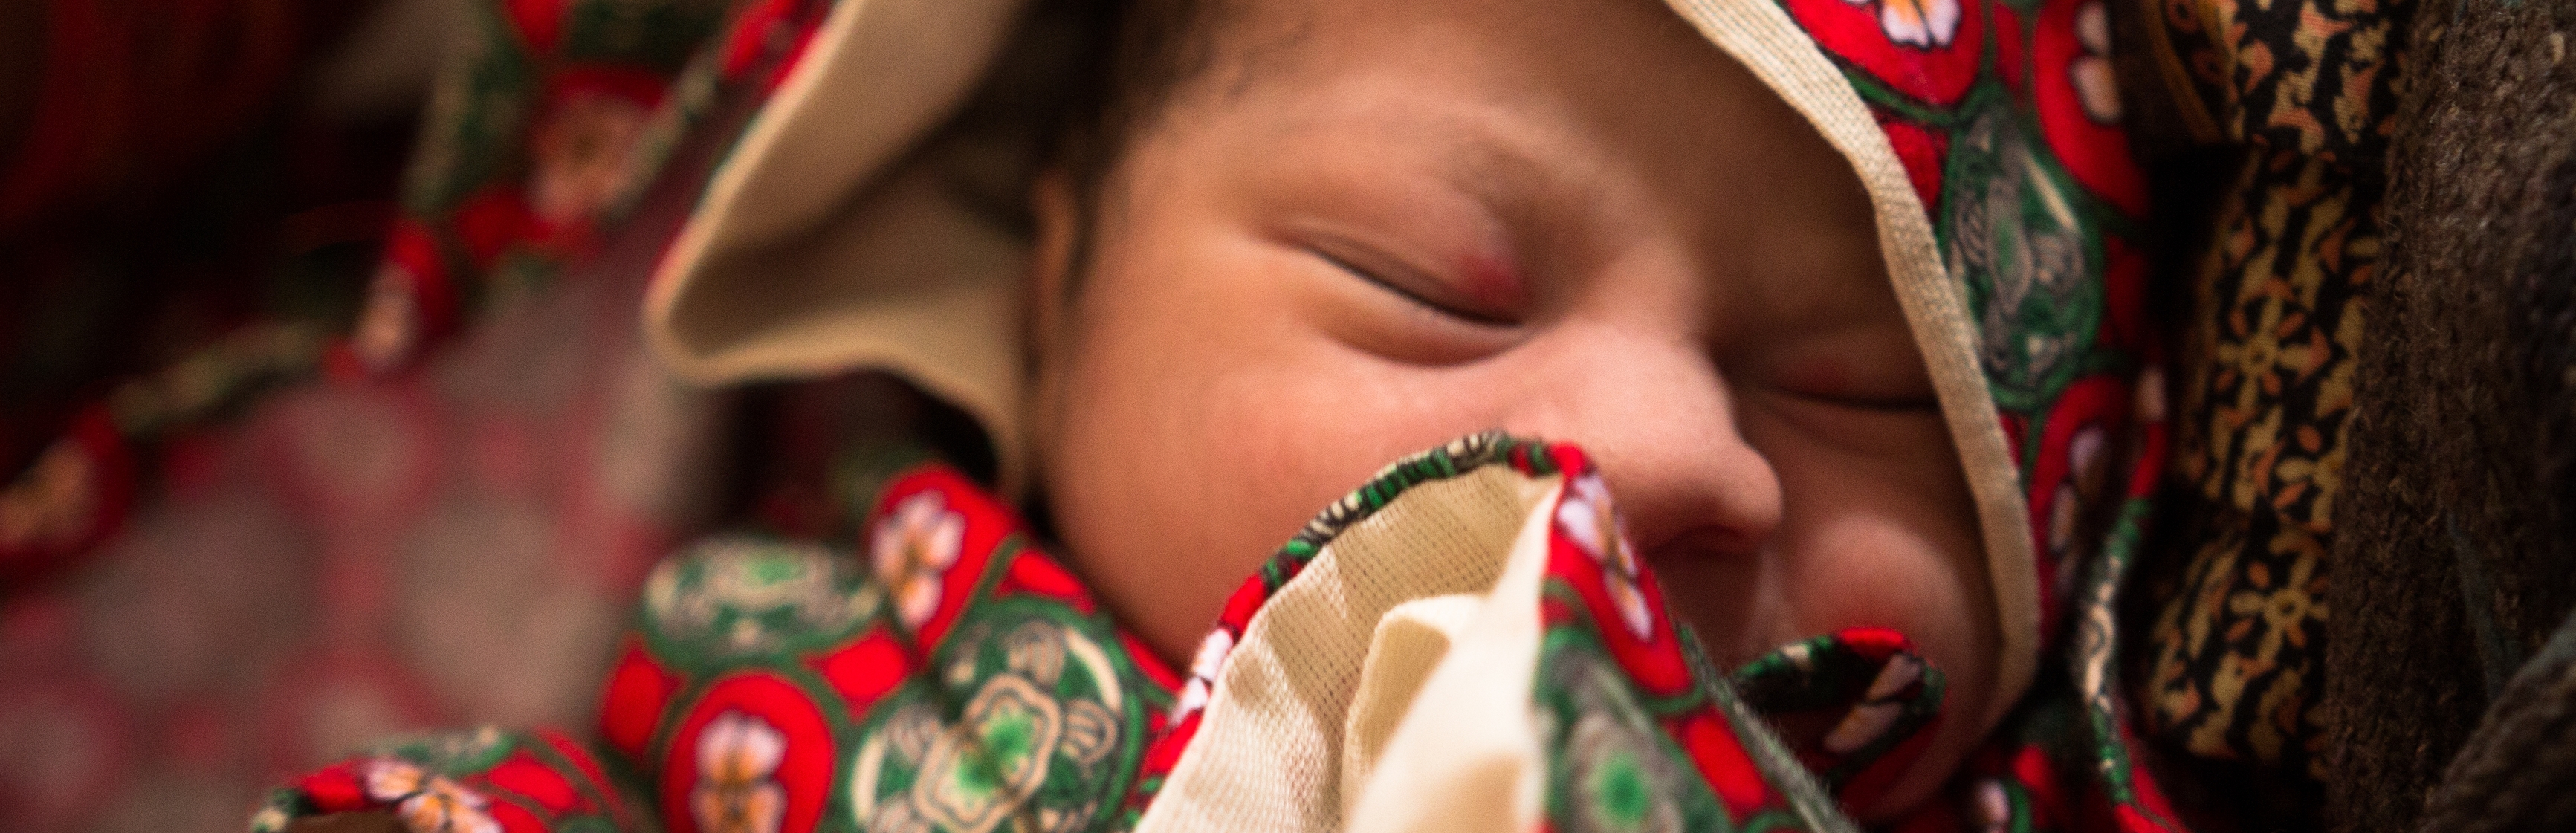 A newborn baby girl in Nepal – only a few minutes old – dressed in warm clothes to prevent hyperthermia. Photo credit: David Wardell/Save the Children, March 2014.